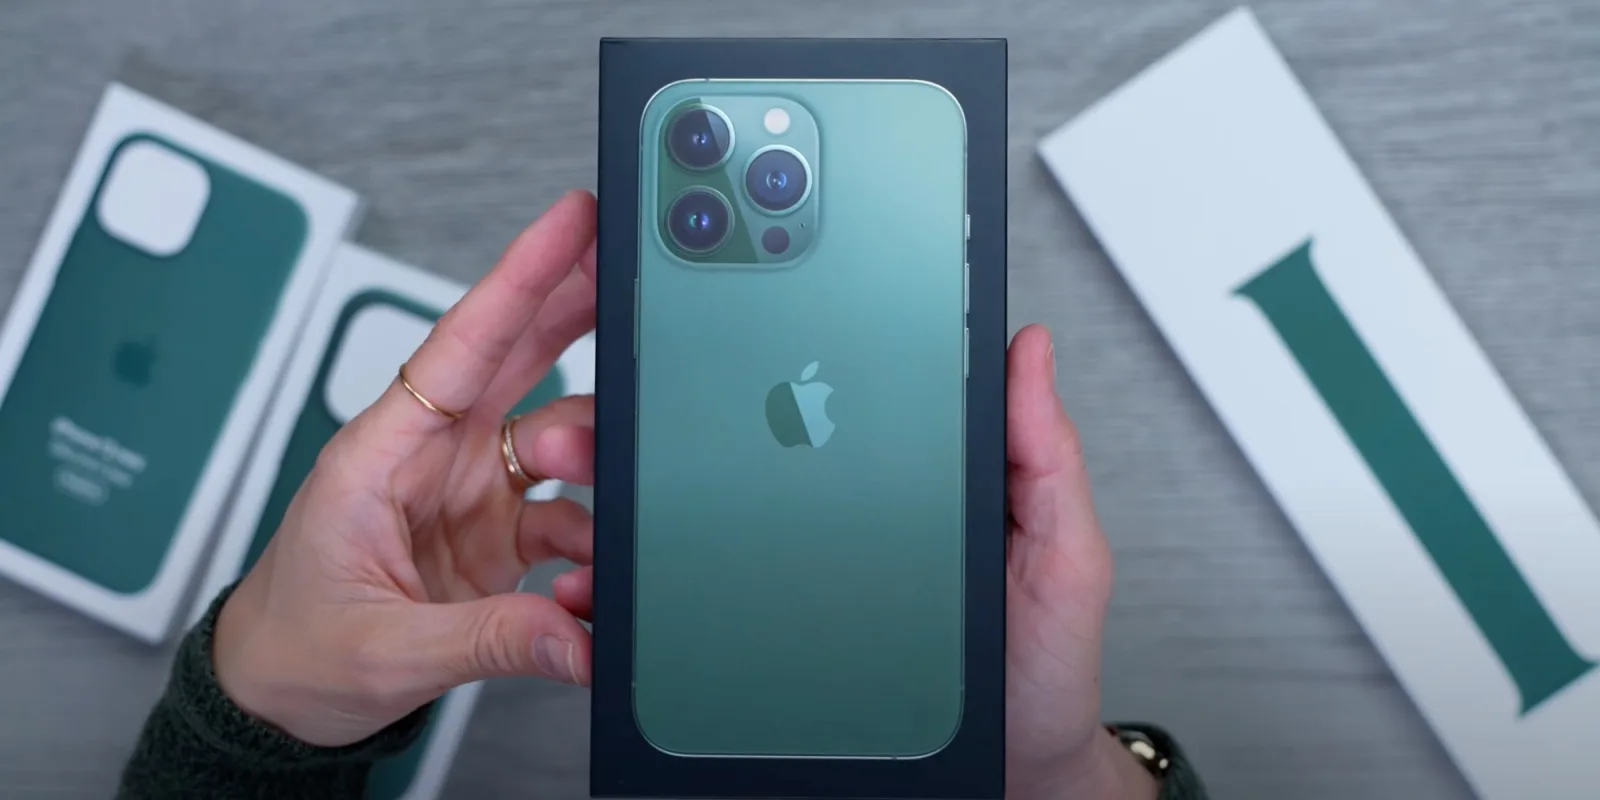 This image shows the iPhone 13 Pro in alpine green color box pack in the hands of man.